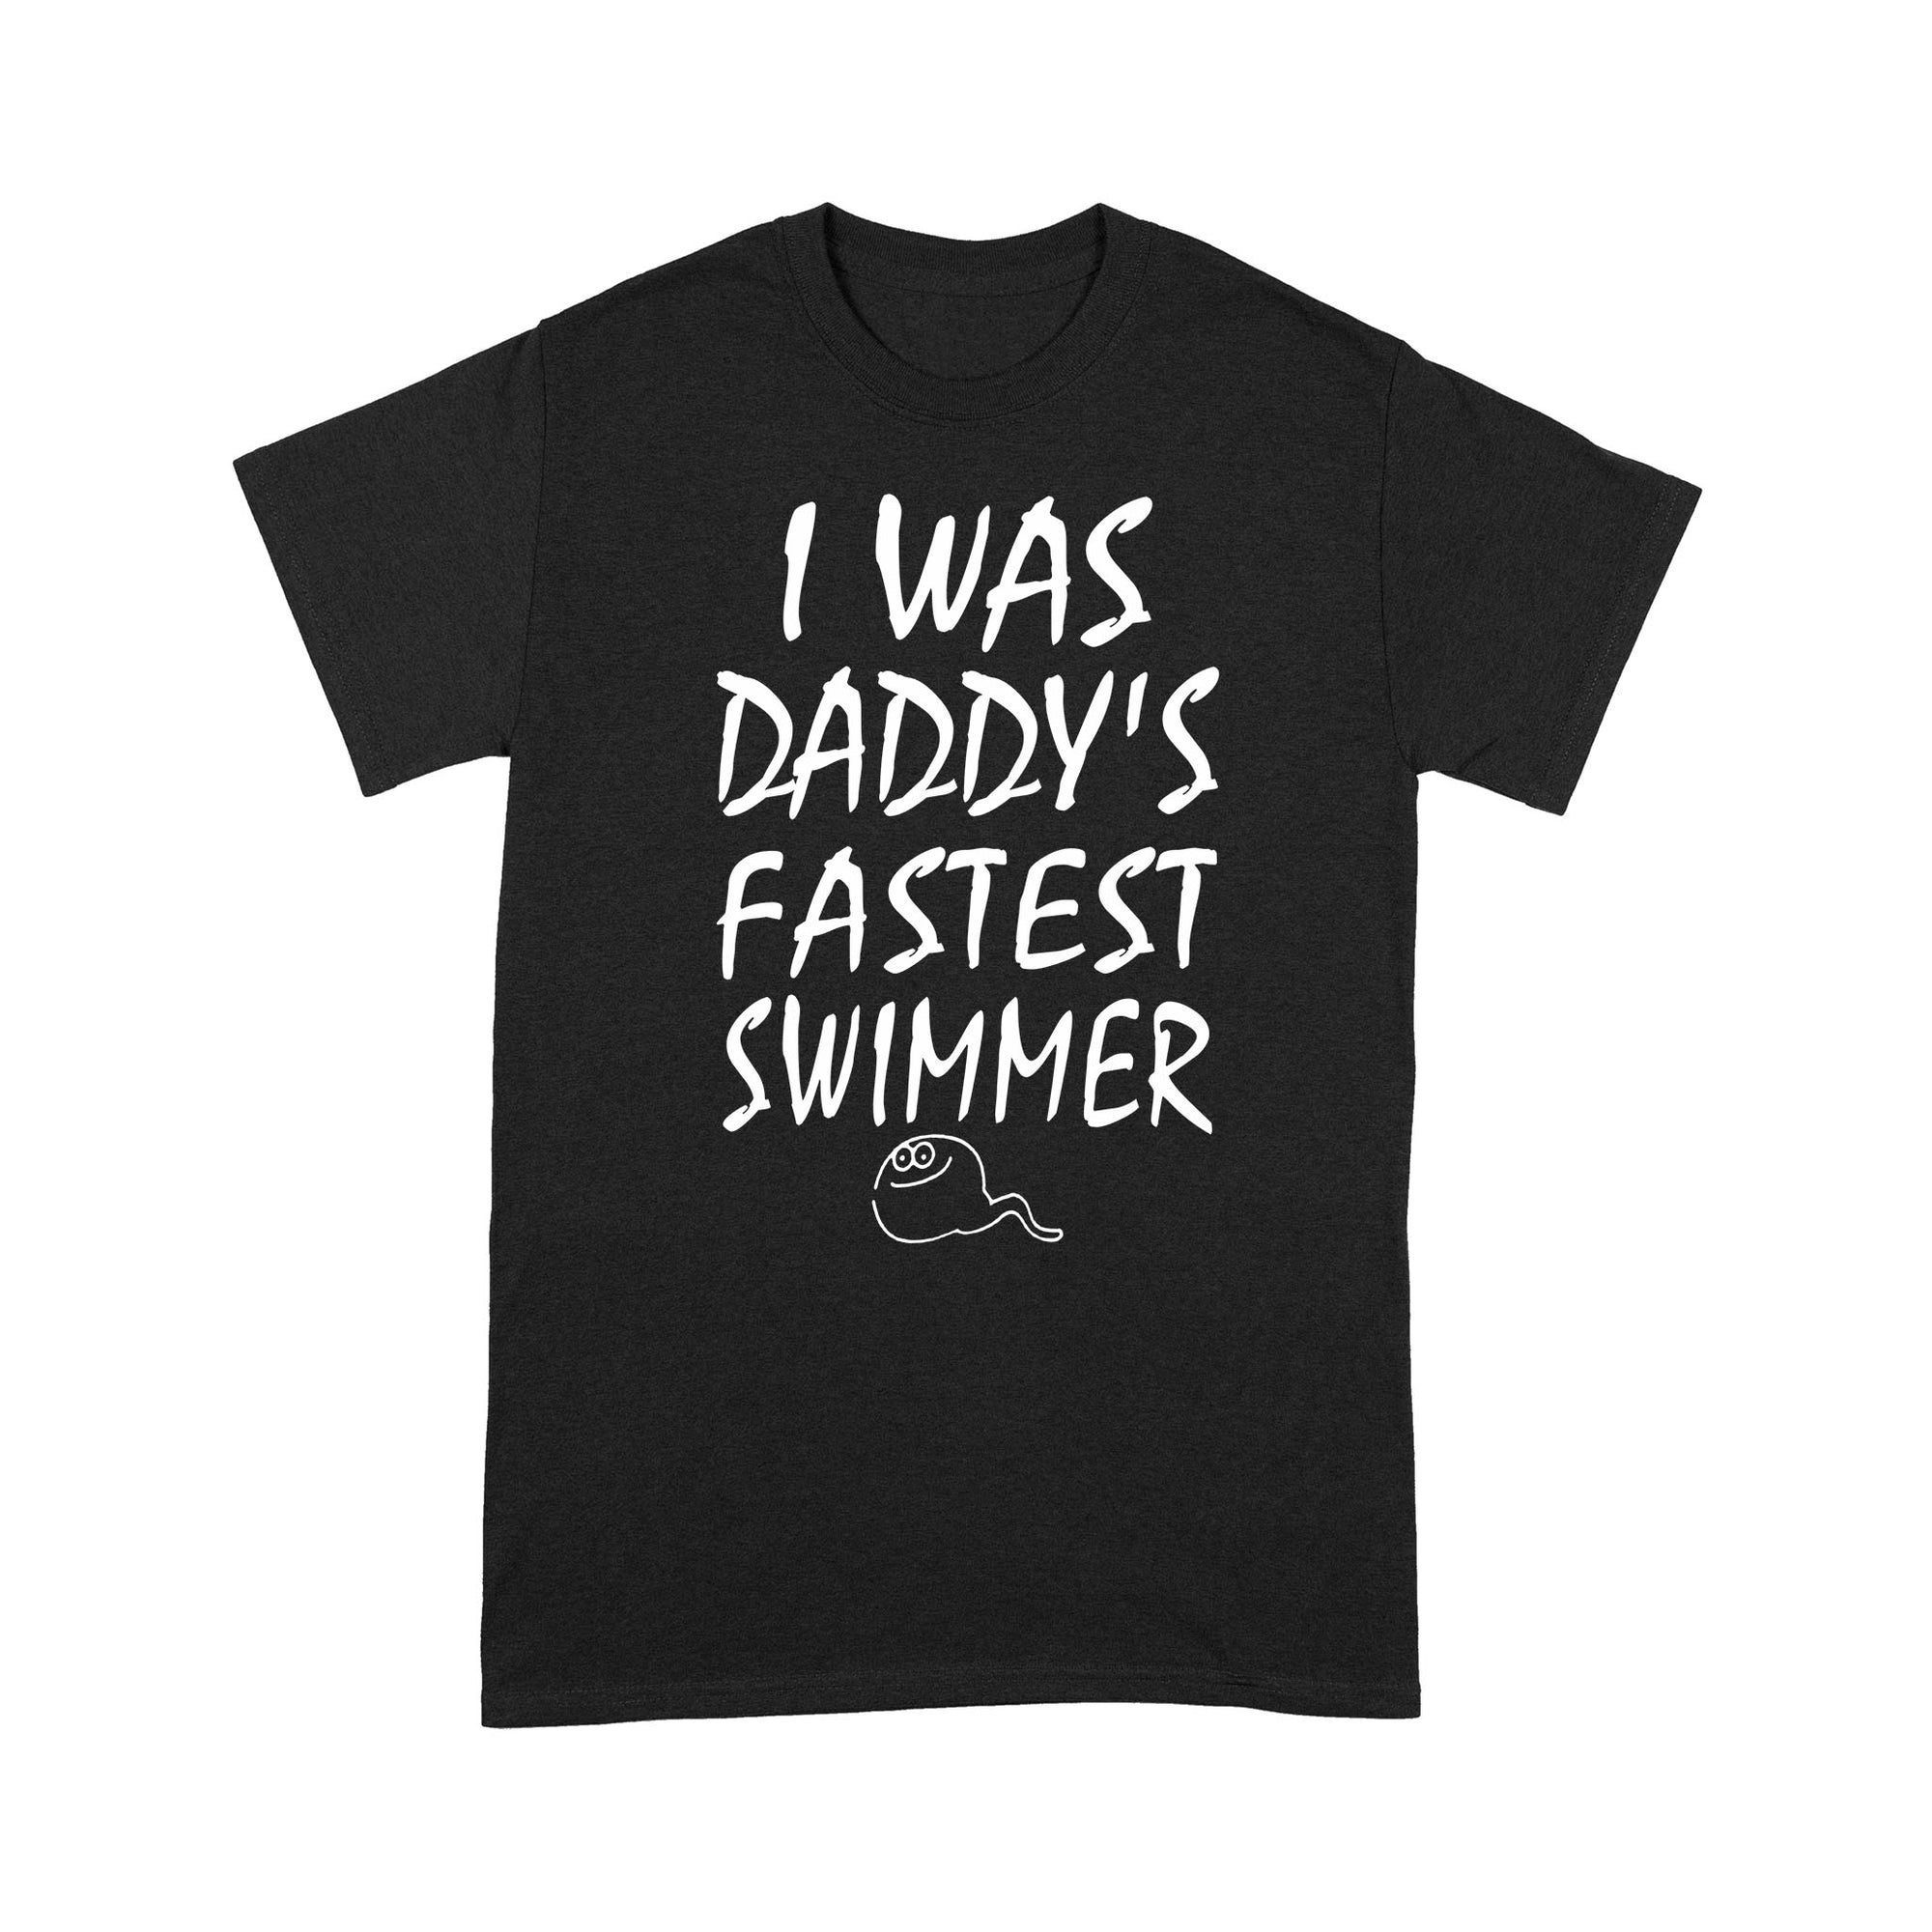 I Was Daddy's Fastest Swimmer - Standard T-shirt